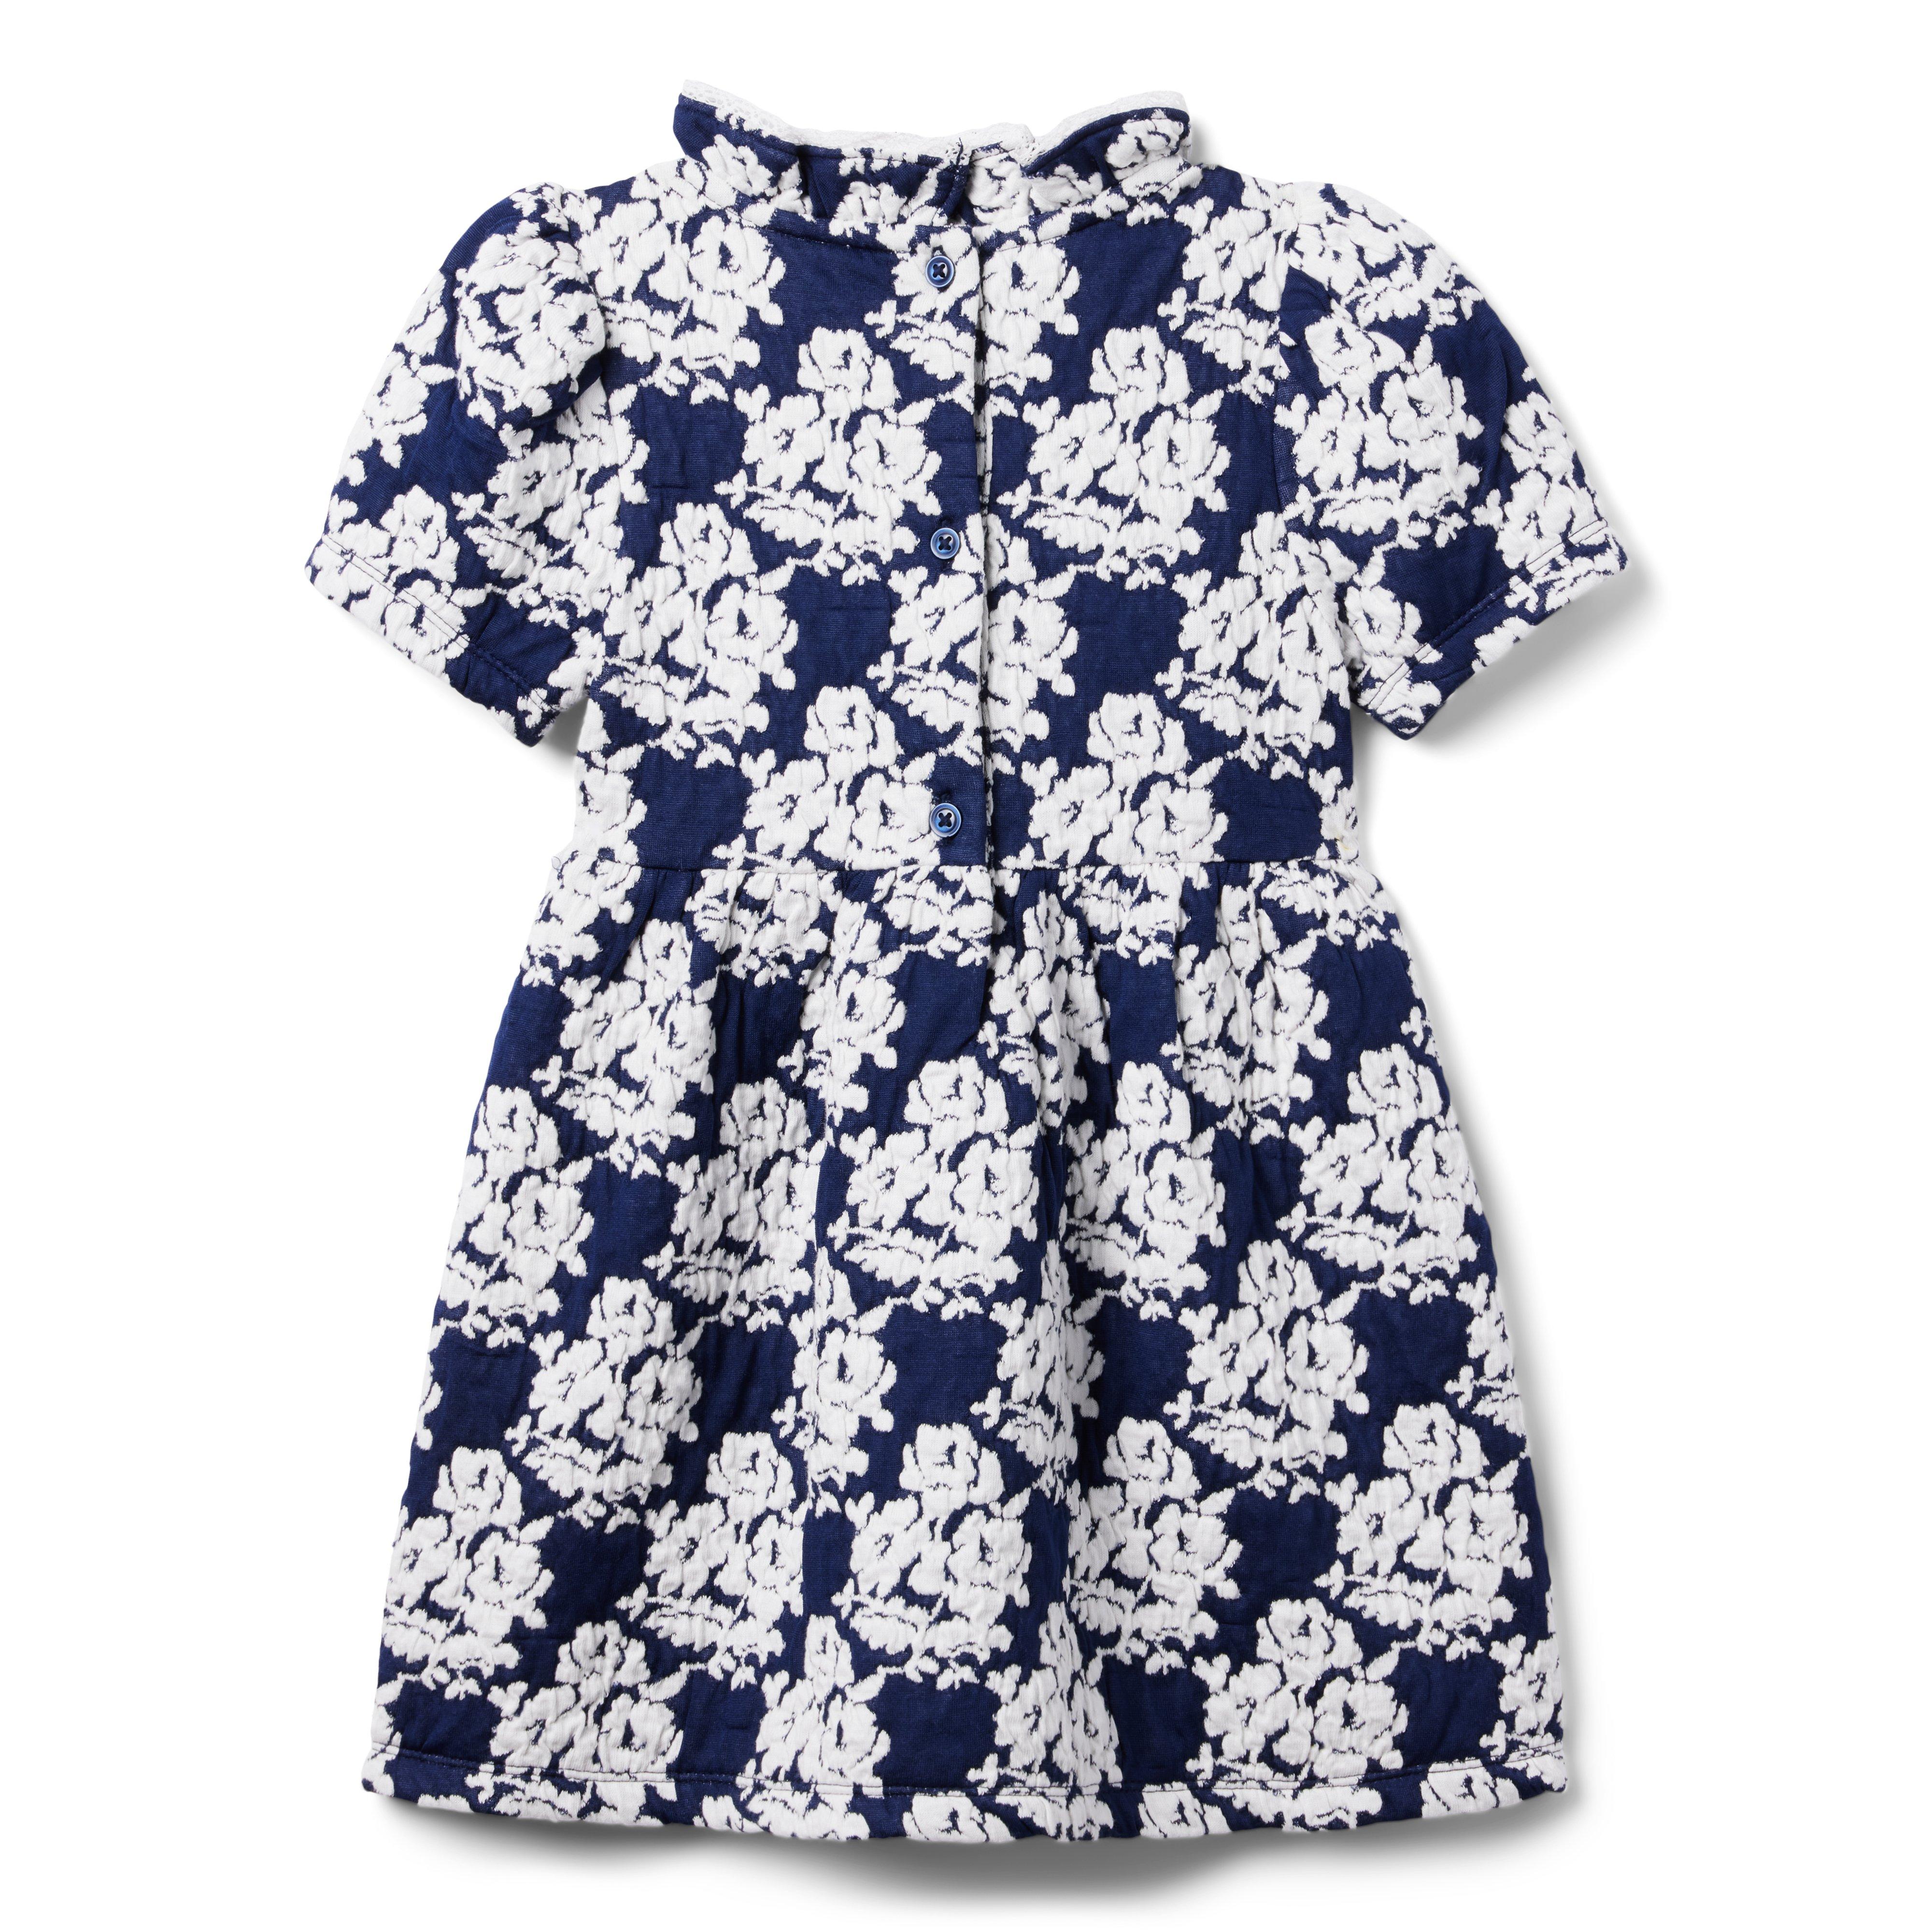 Girl Merchant Marine Floral Floral Jacquard Dress by Janie and Jack